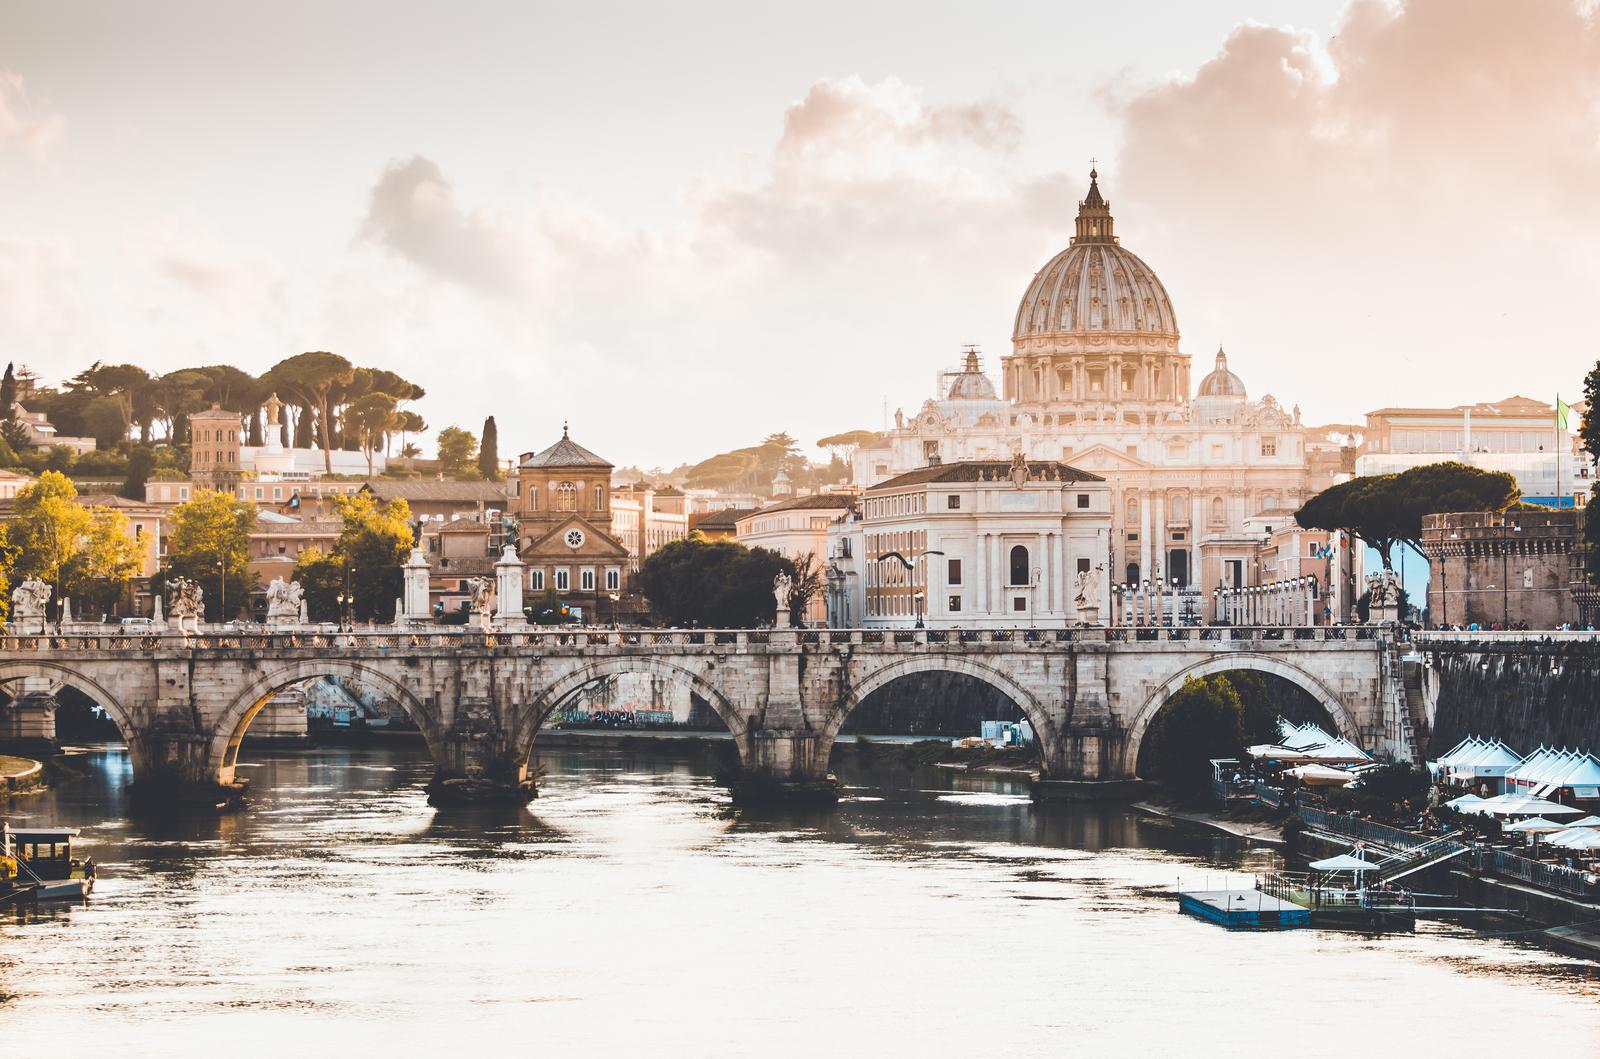 How Well-Rounded Is Your Knowledge? Take This General Knowledge Quiz to Find Out! Rome, Italy